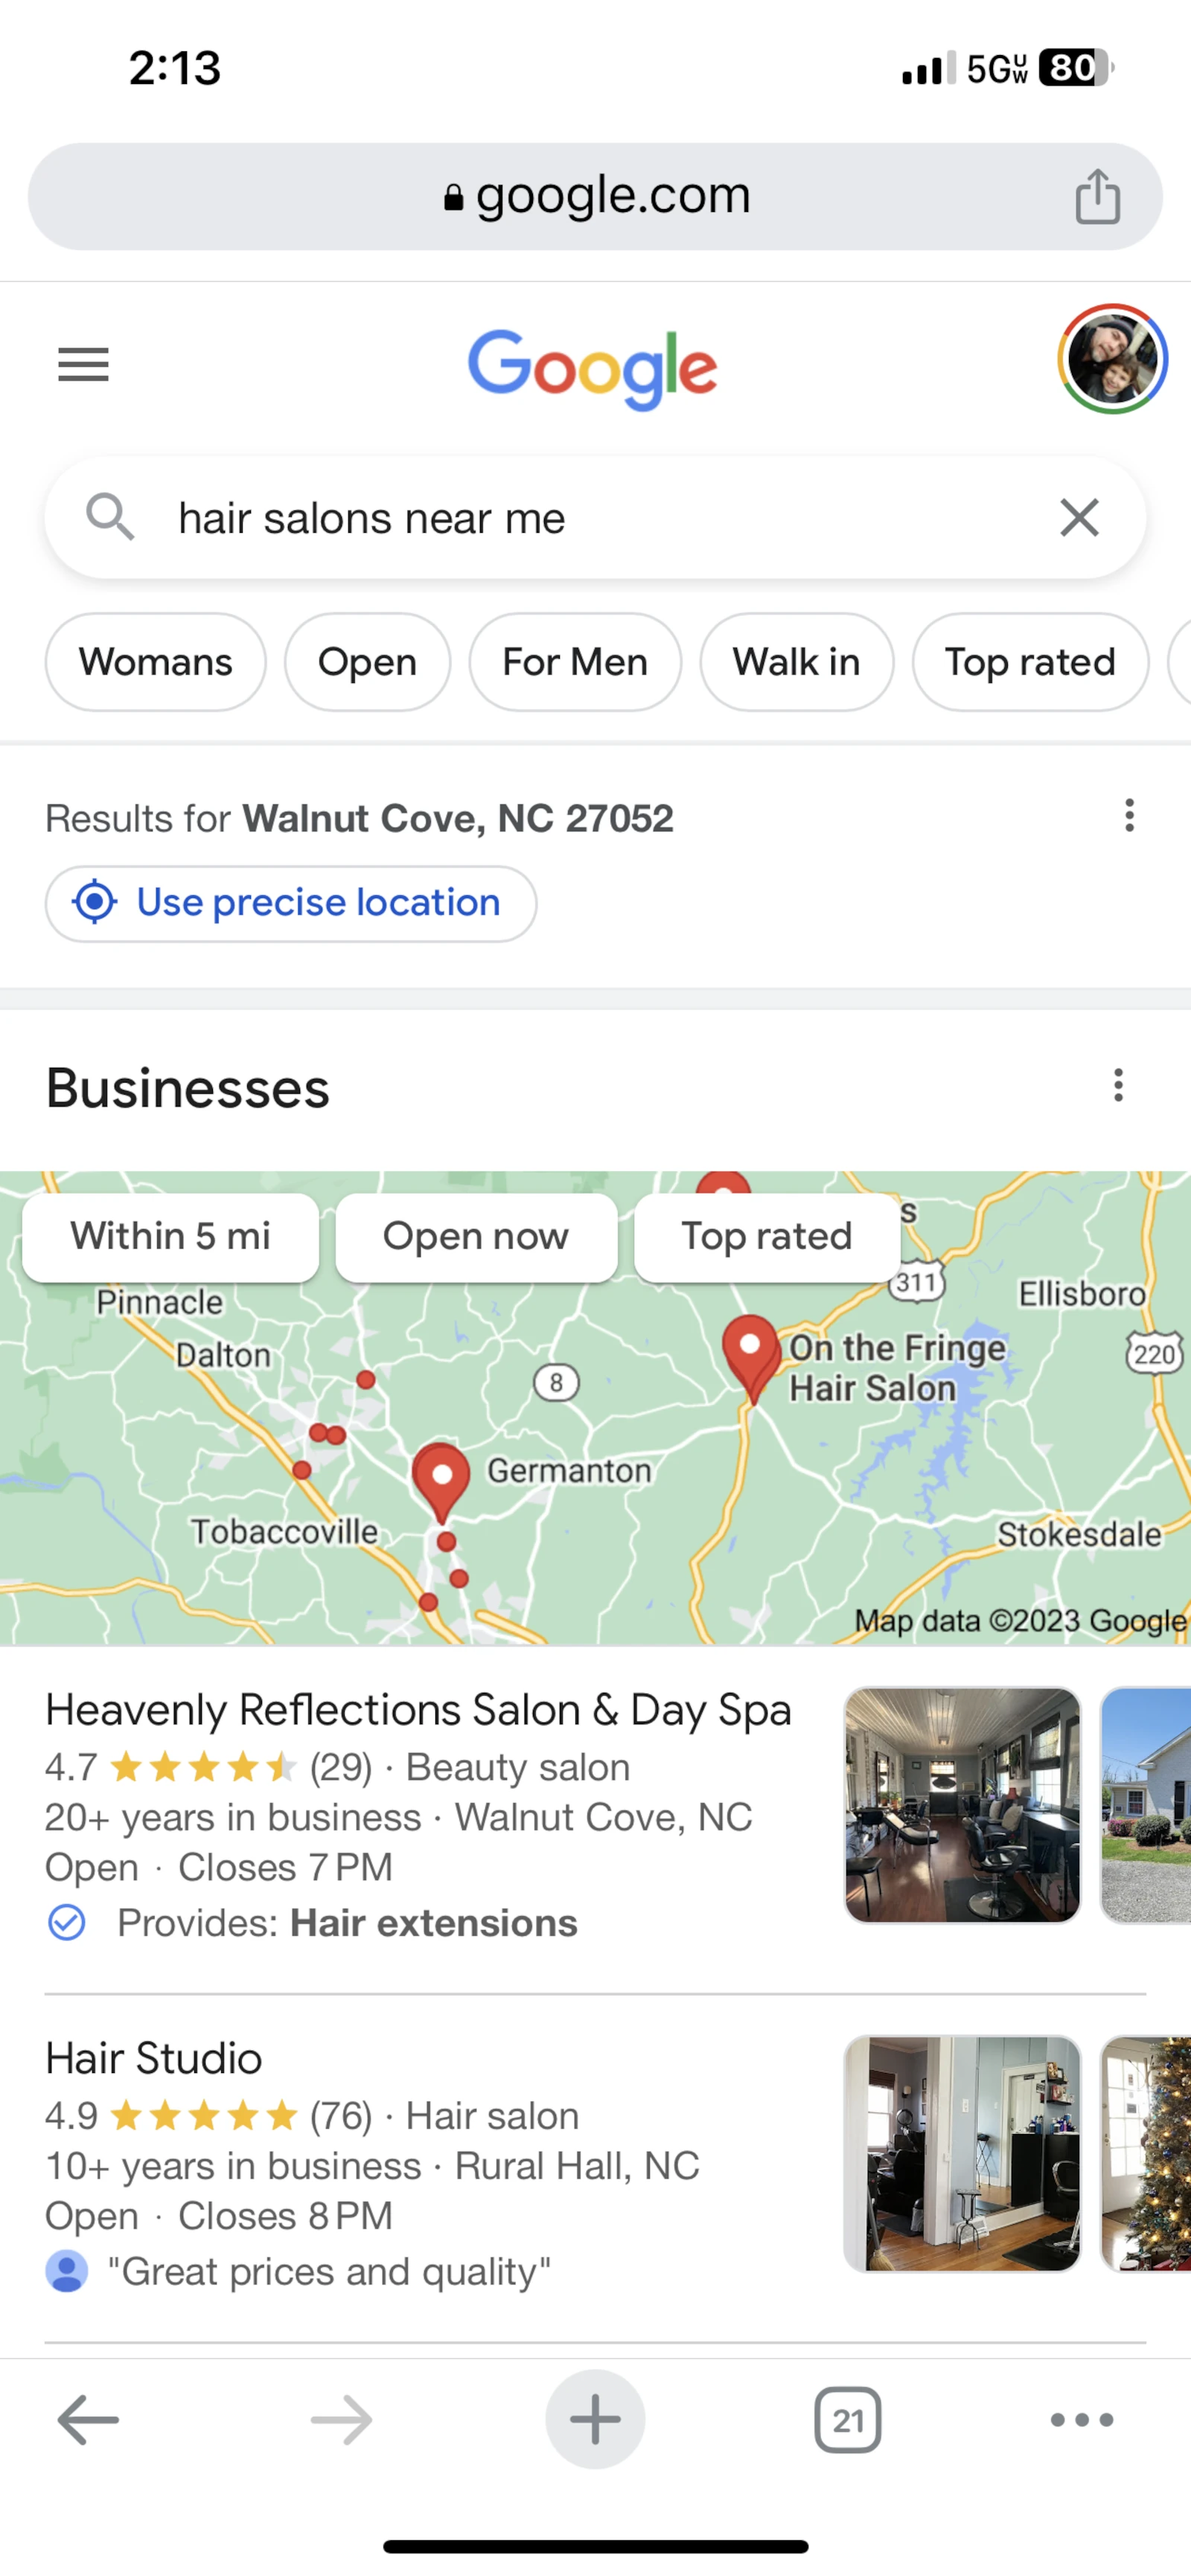 Screenshot of mobile search for "hair salons near me" showing search results and reviews.